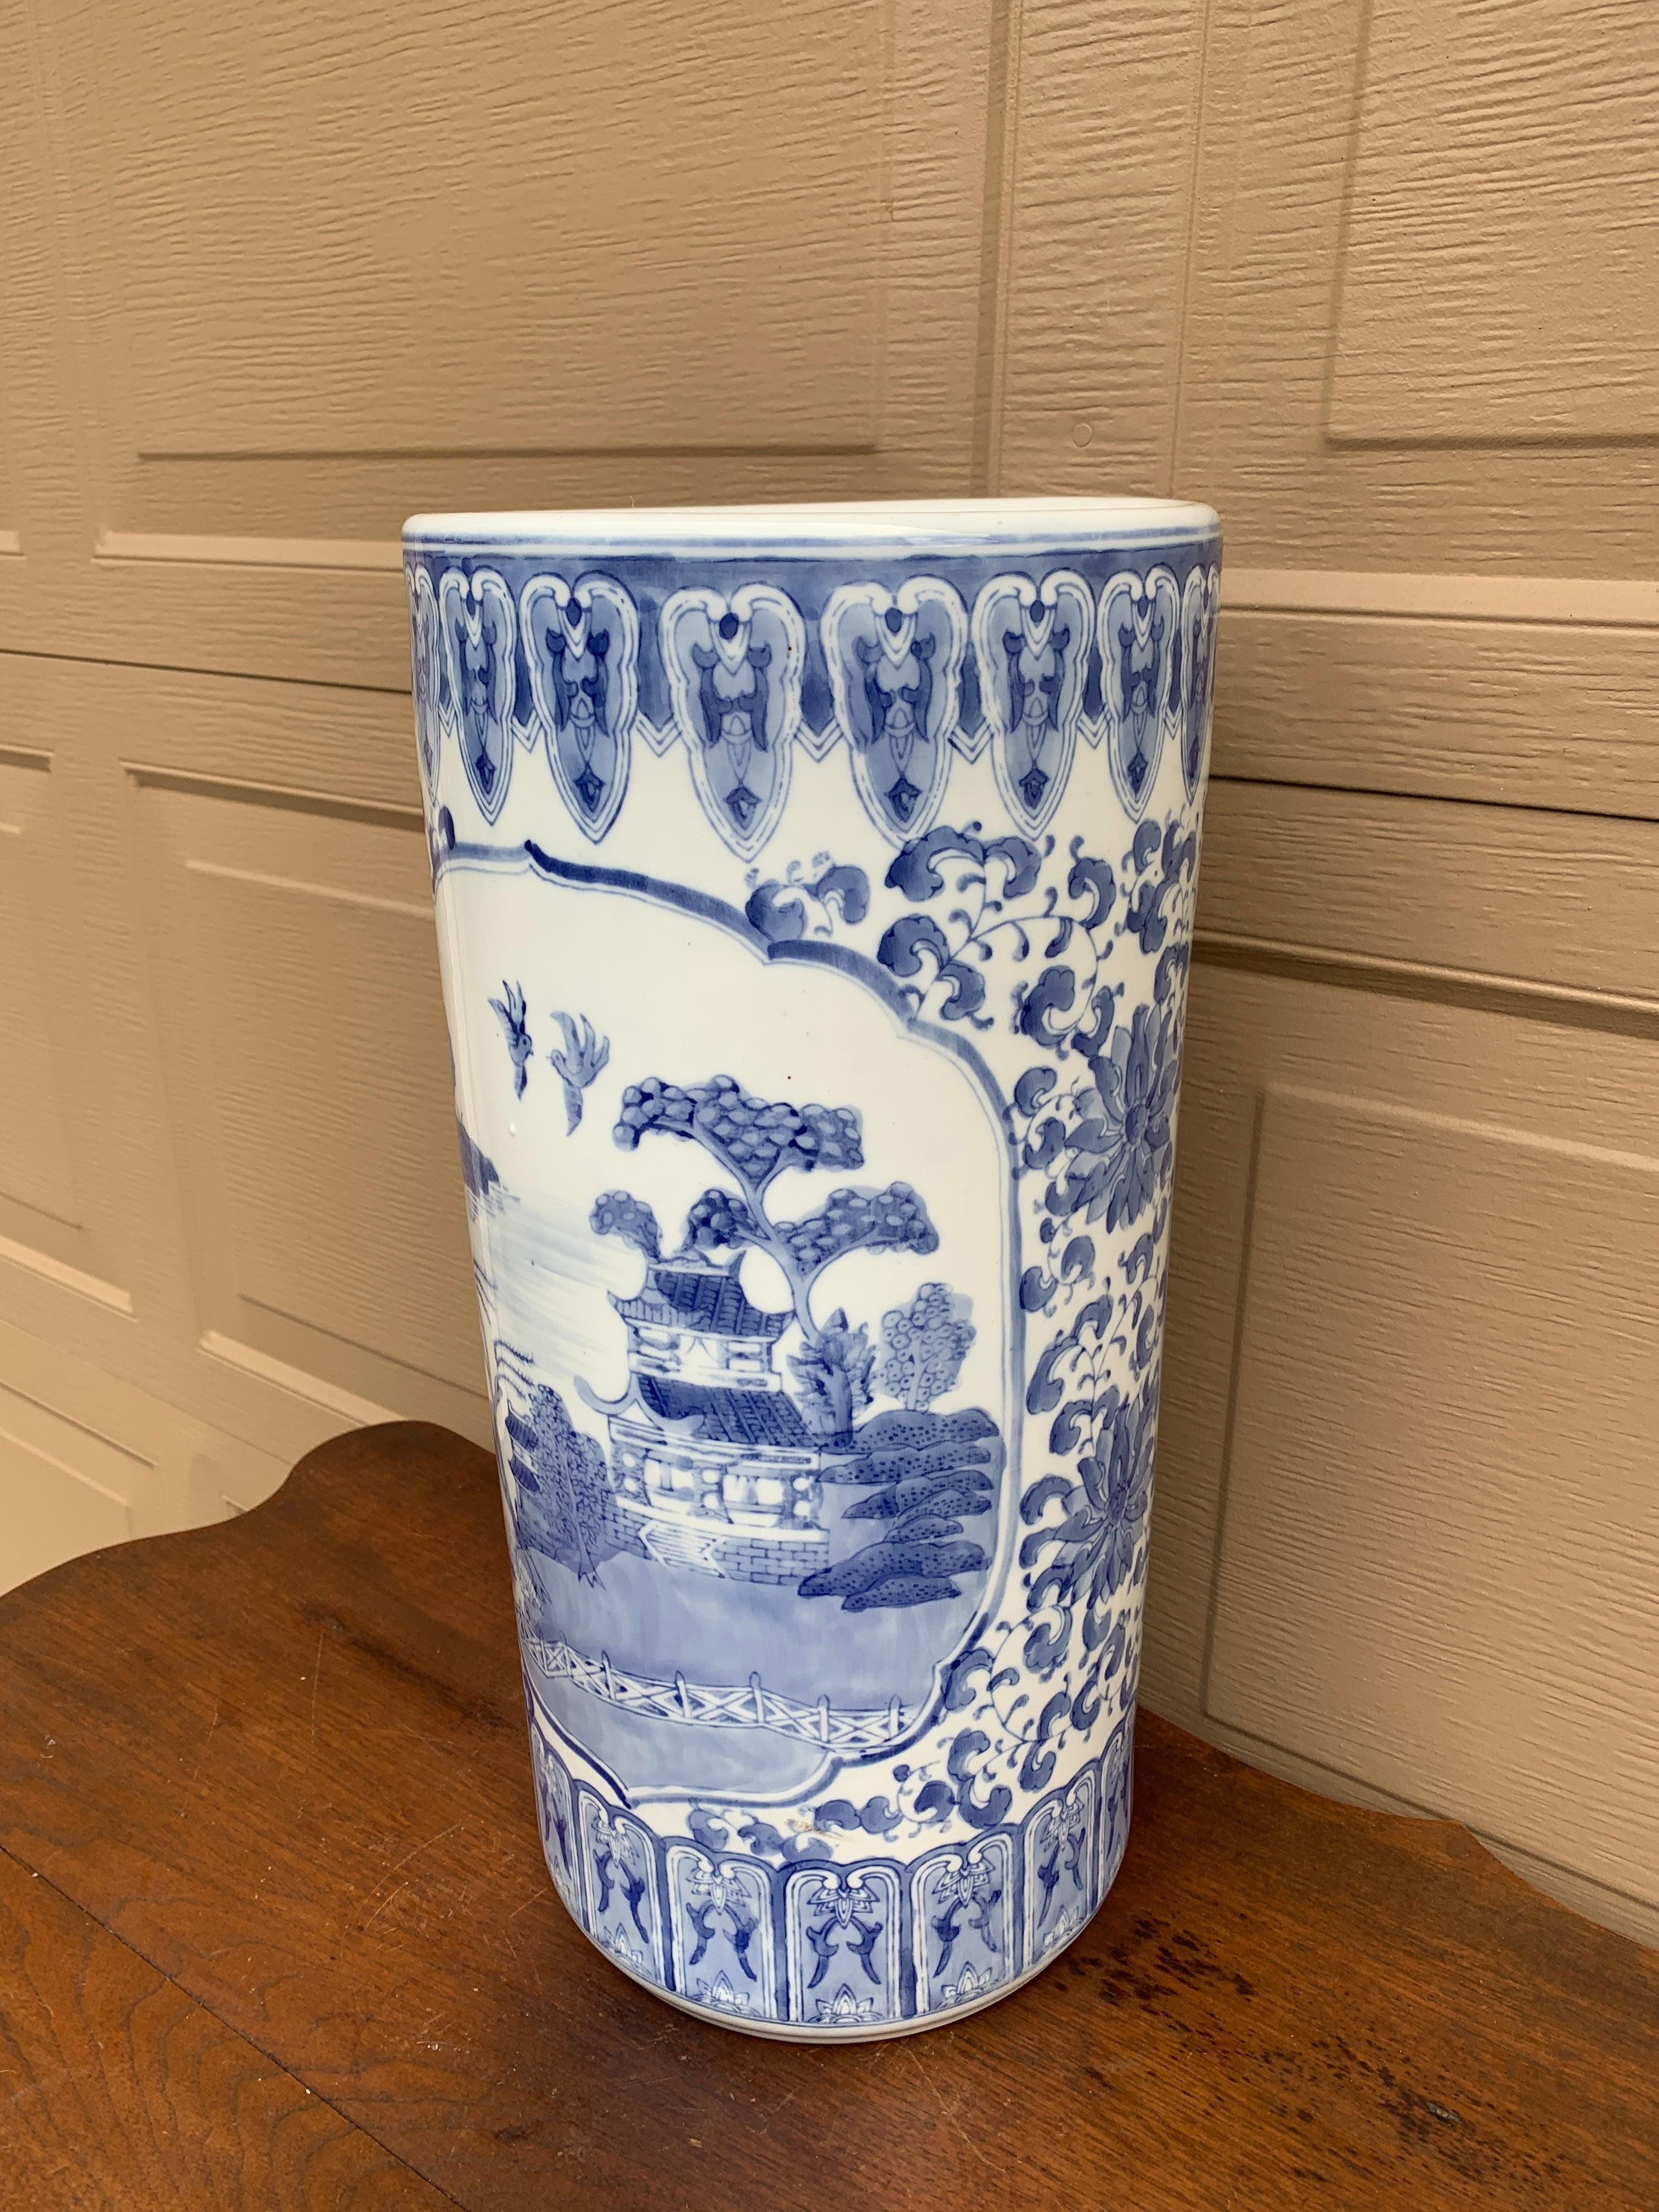 Vintage Chinoiserie Blue and White Porcelain Umbrella Stand In Good Condition For Sale In Elkhart, IN